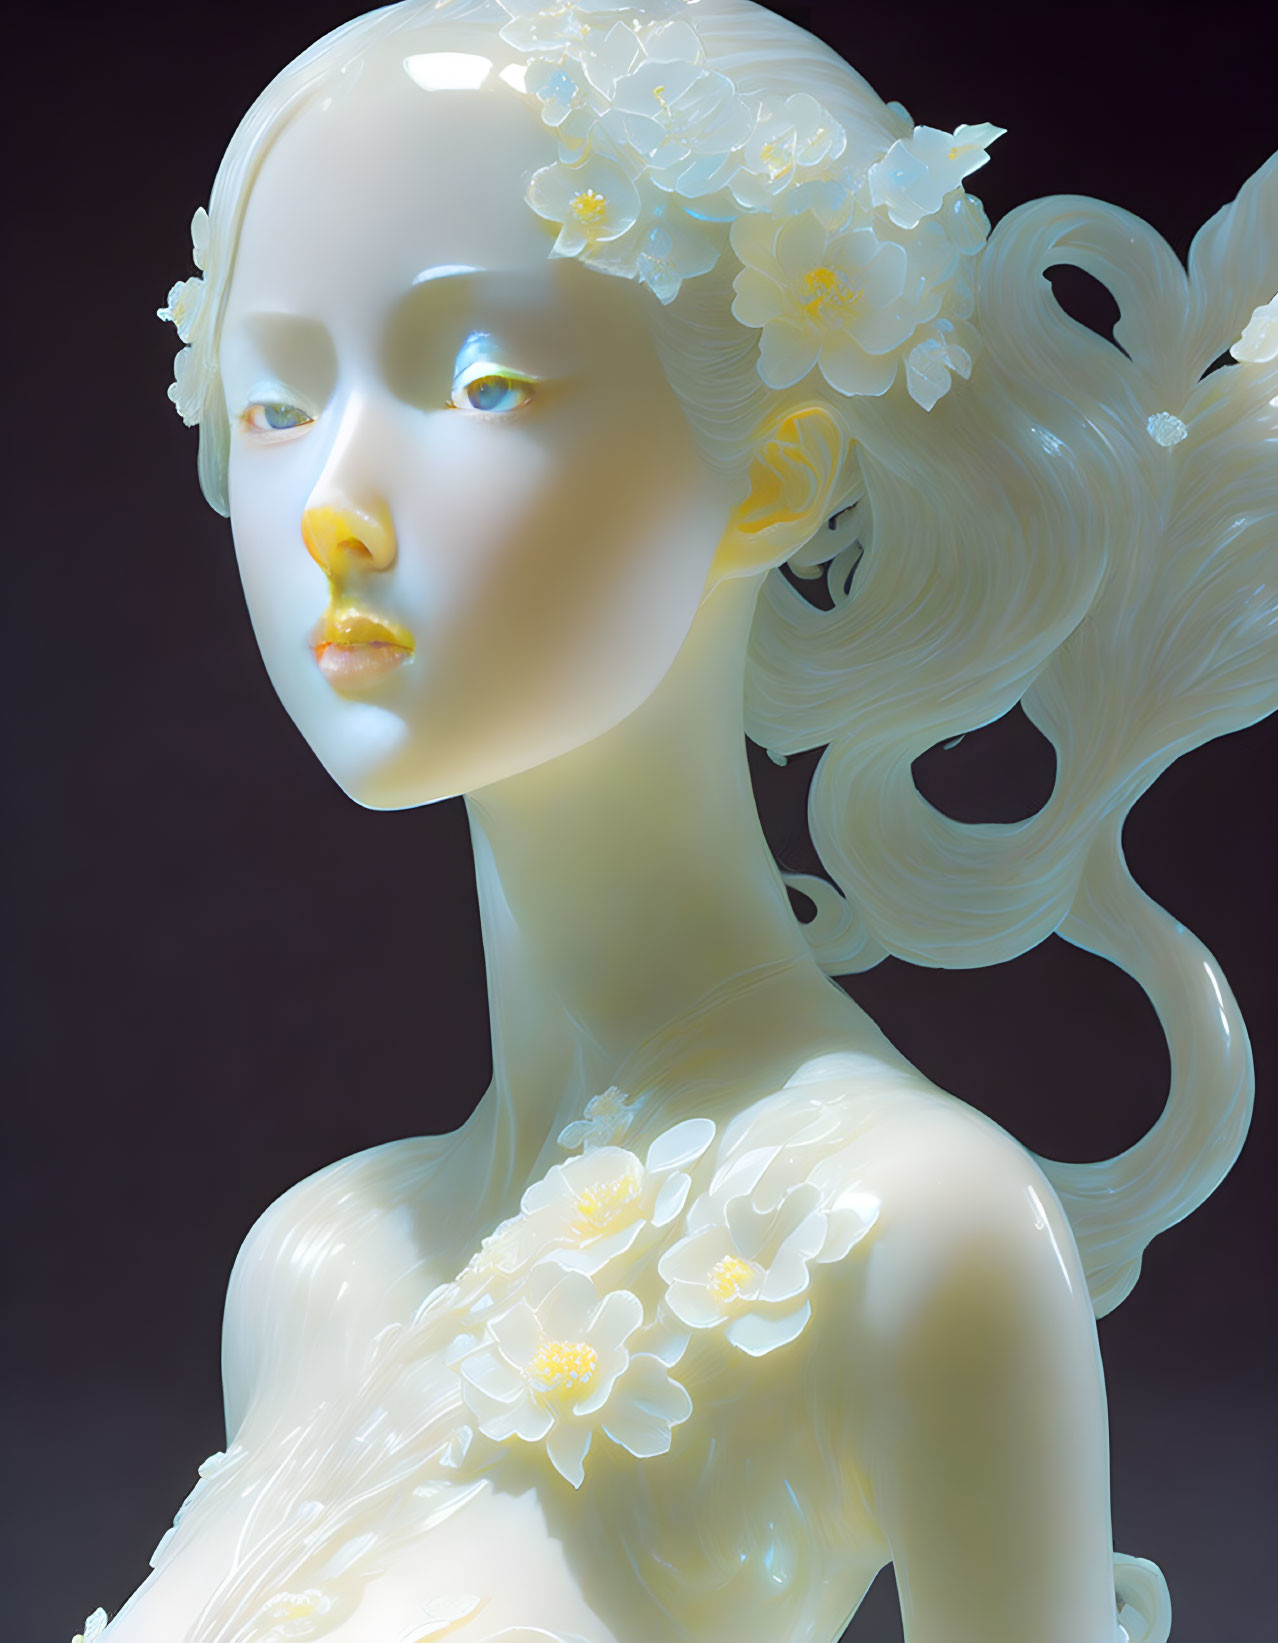 Porcelain-like figure with flowing hair and white flowers on a dark background